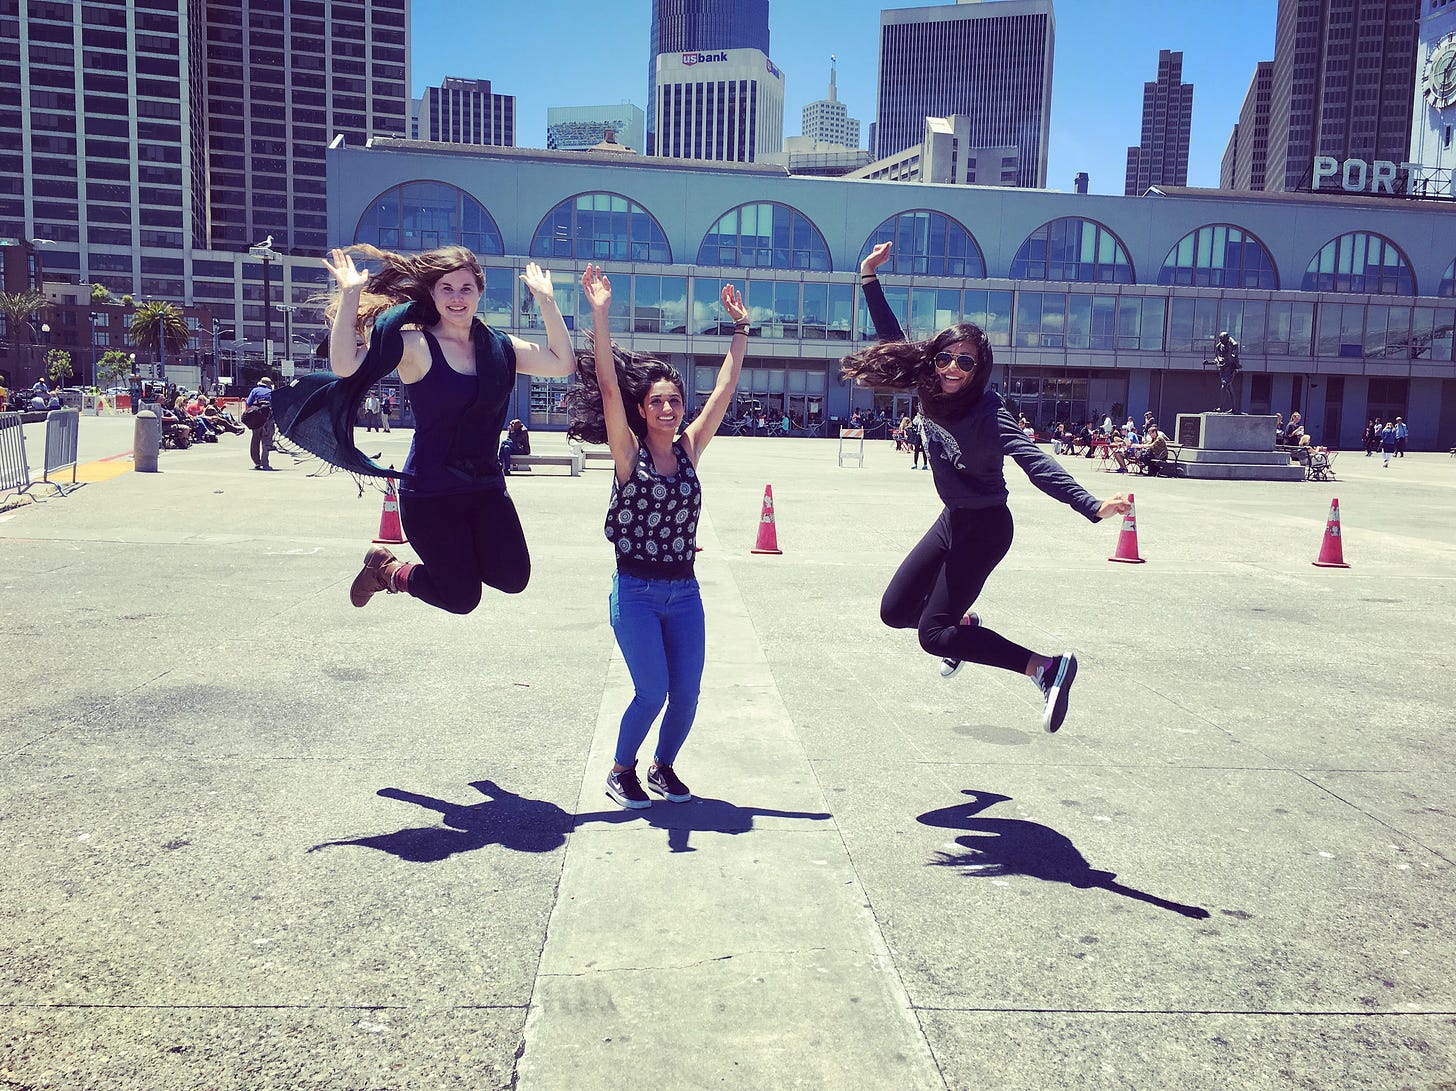 Three women jump in front of San Francisco's Ferry Building. The woman on the left has long brown hair and wears dark clothing. The woman in the middle stands mid-jump with her hands up and wears a dark top with blue jeans. The woman on the right wears sunglasses and dark clothing.